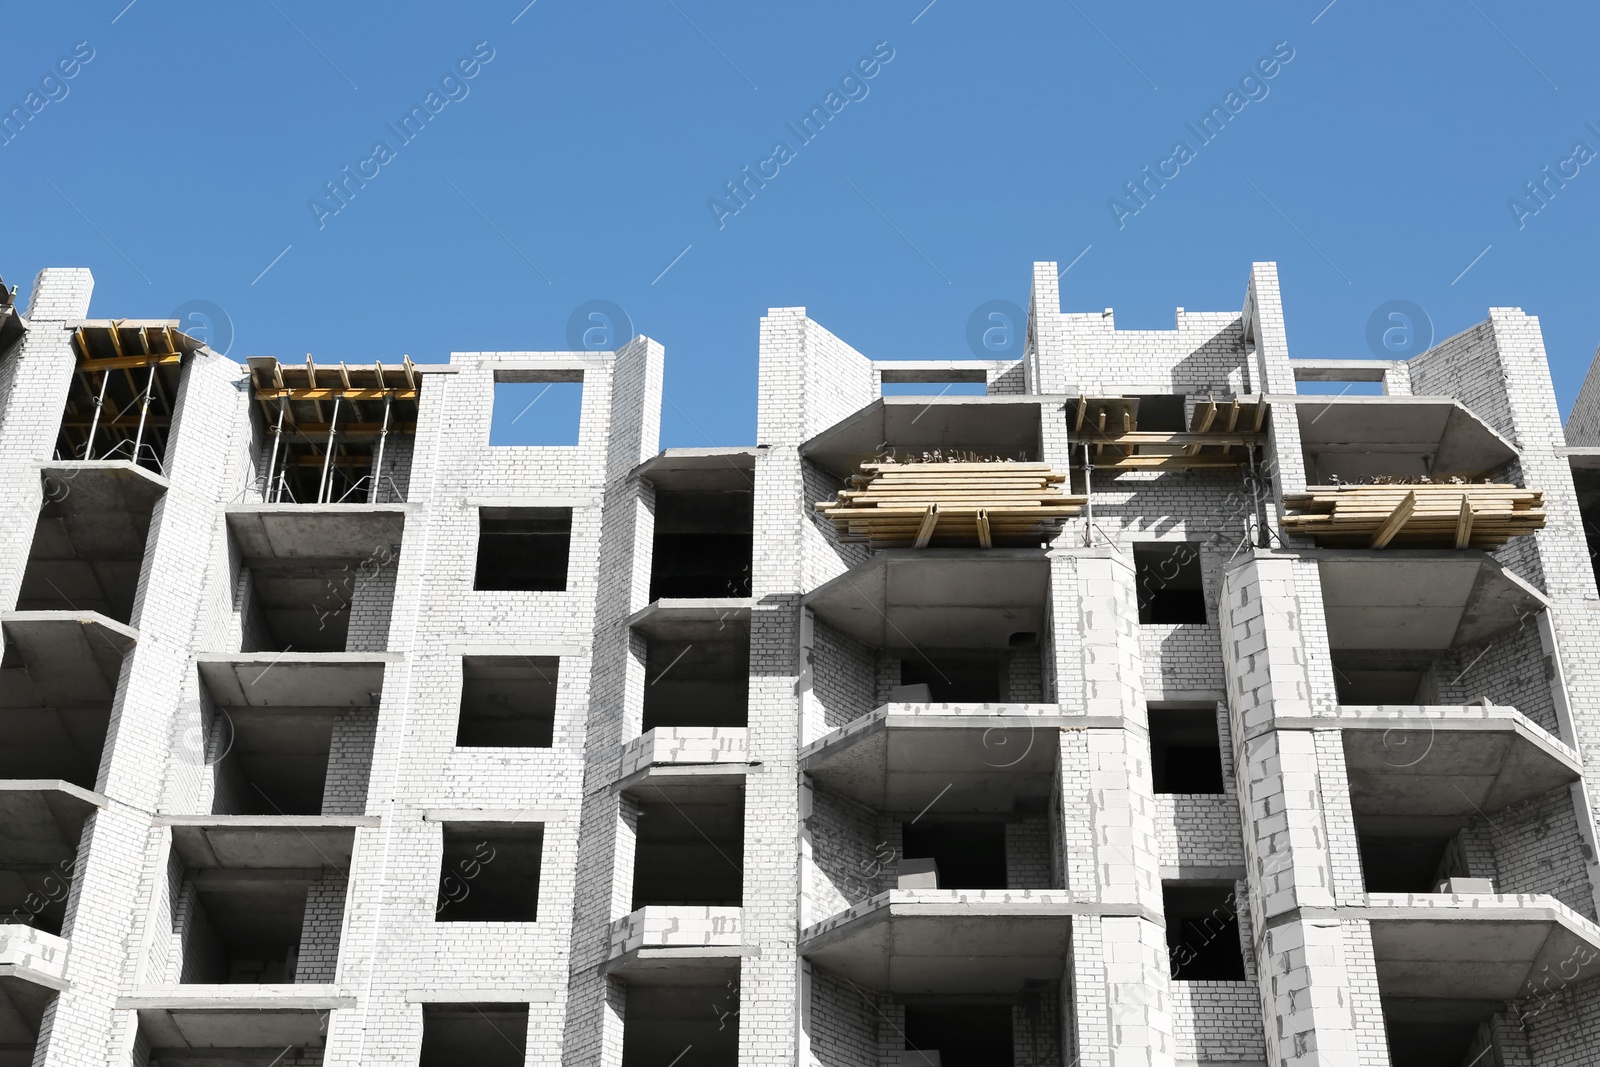 Photo of Construction site with unfinished building on sunny day, low angle view